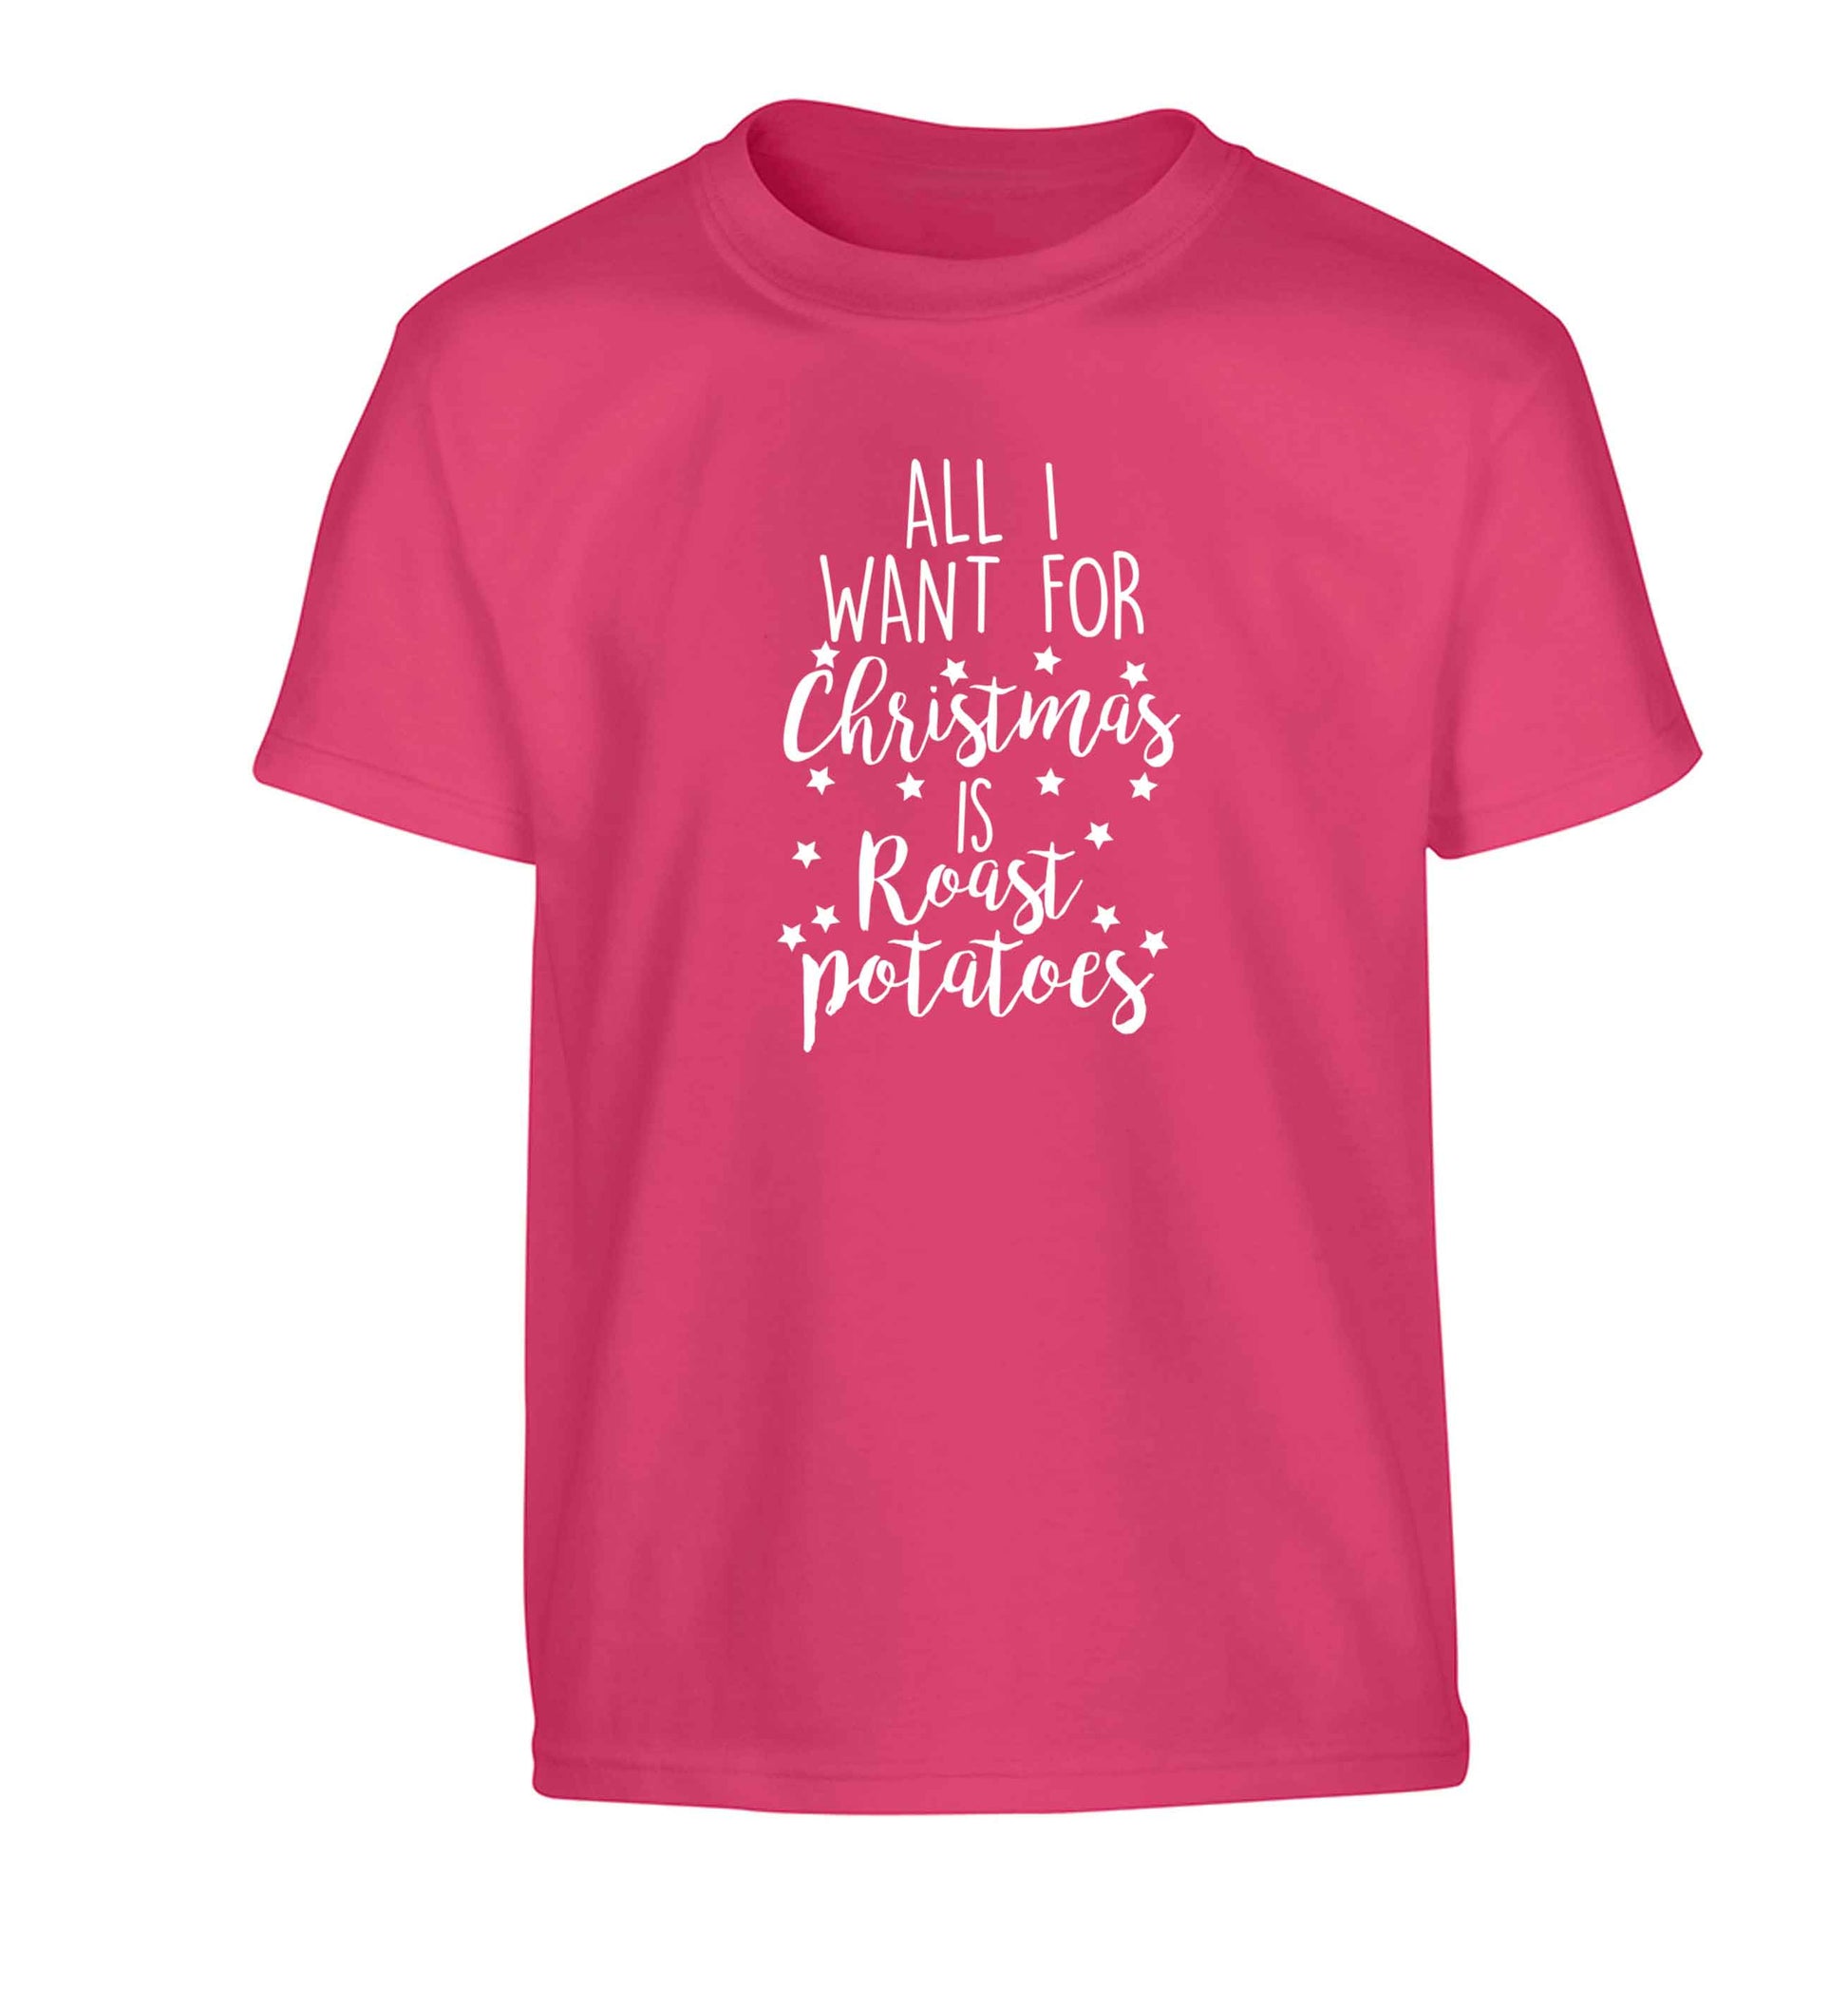 All I want for Christmas is roast potatoes Children's pink Tshirt 12-13 Years